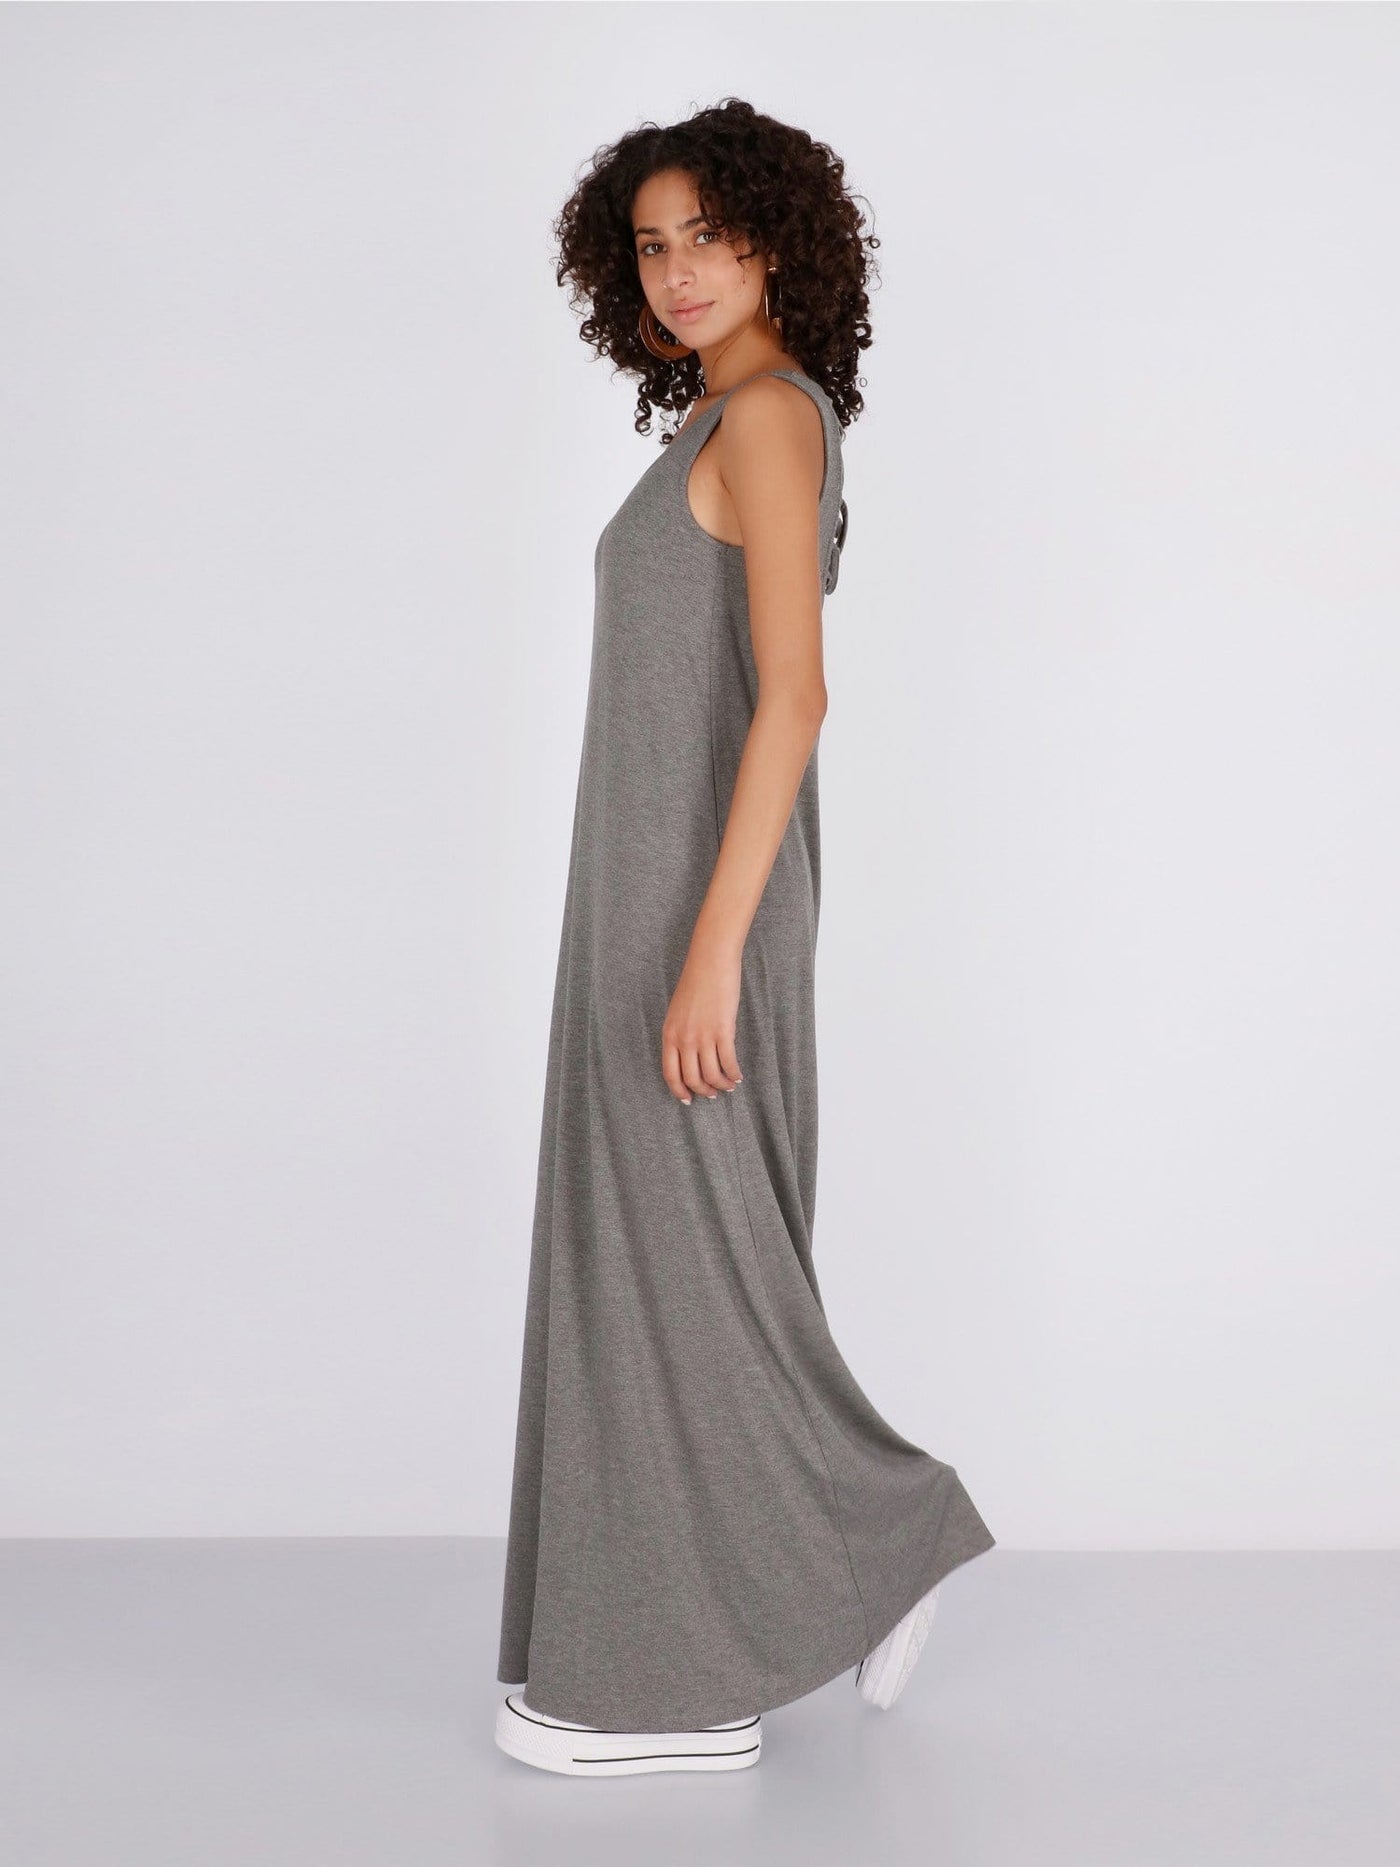 OR Dresses & Jumpsuits Strappy Back Maxi Dress